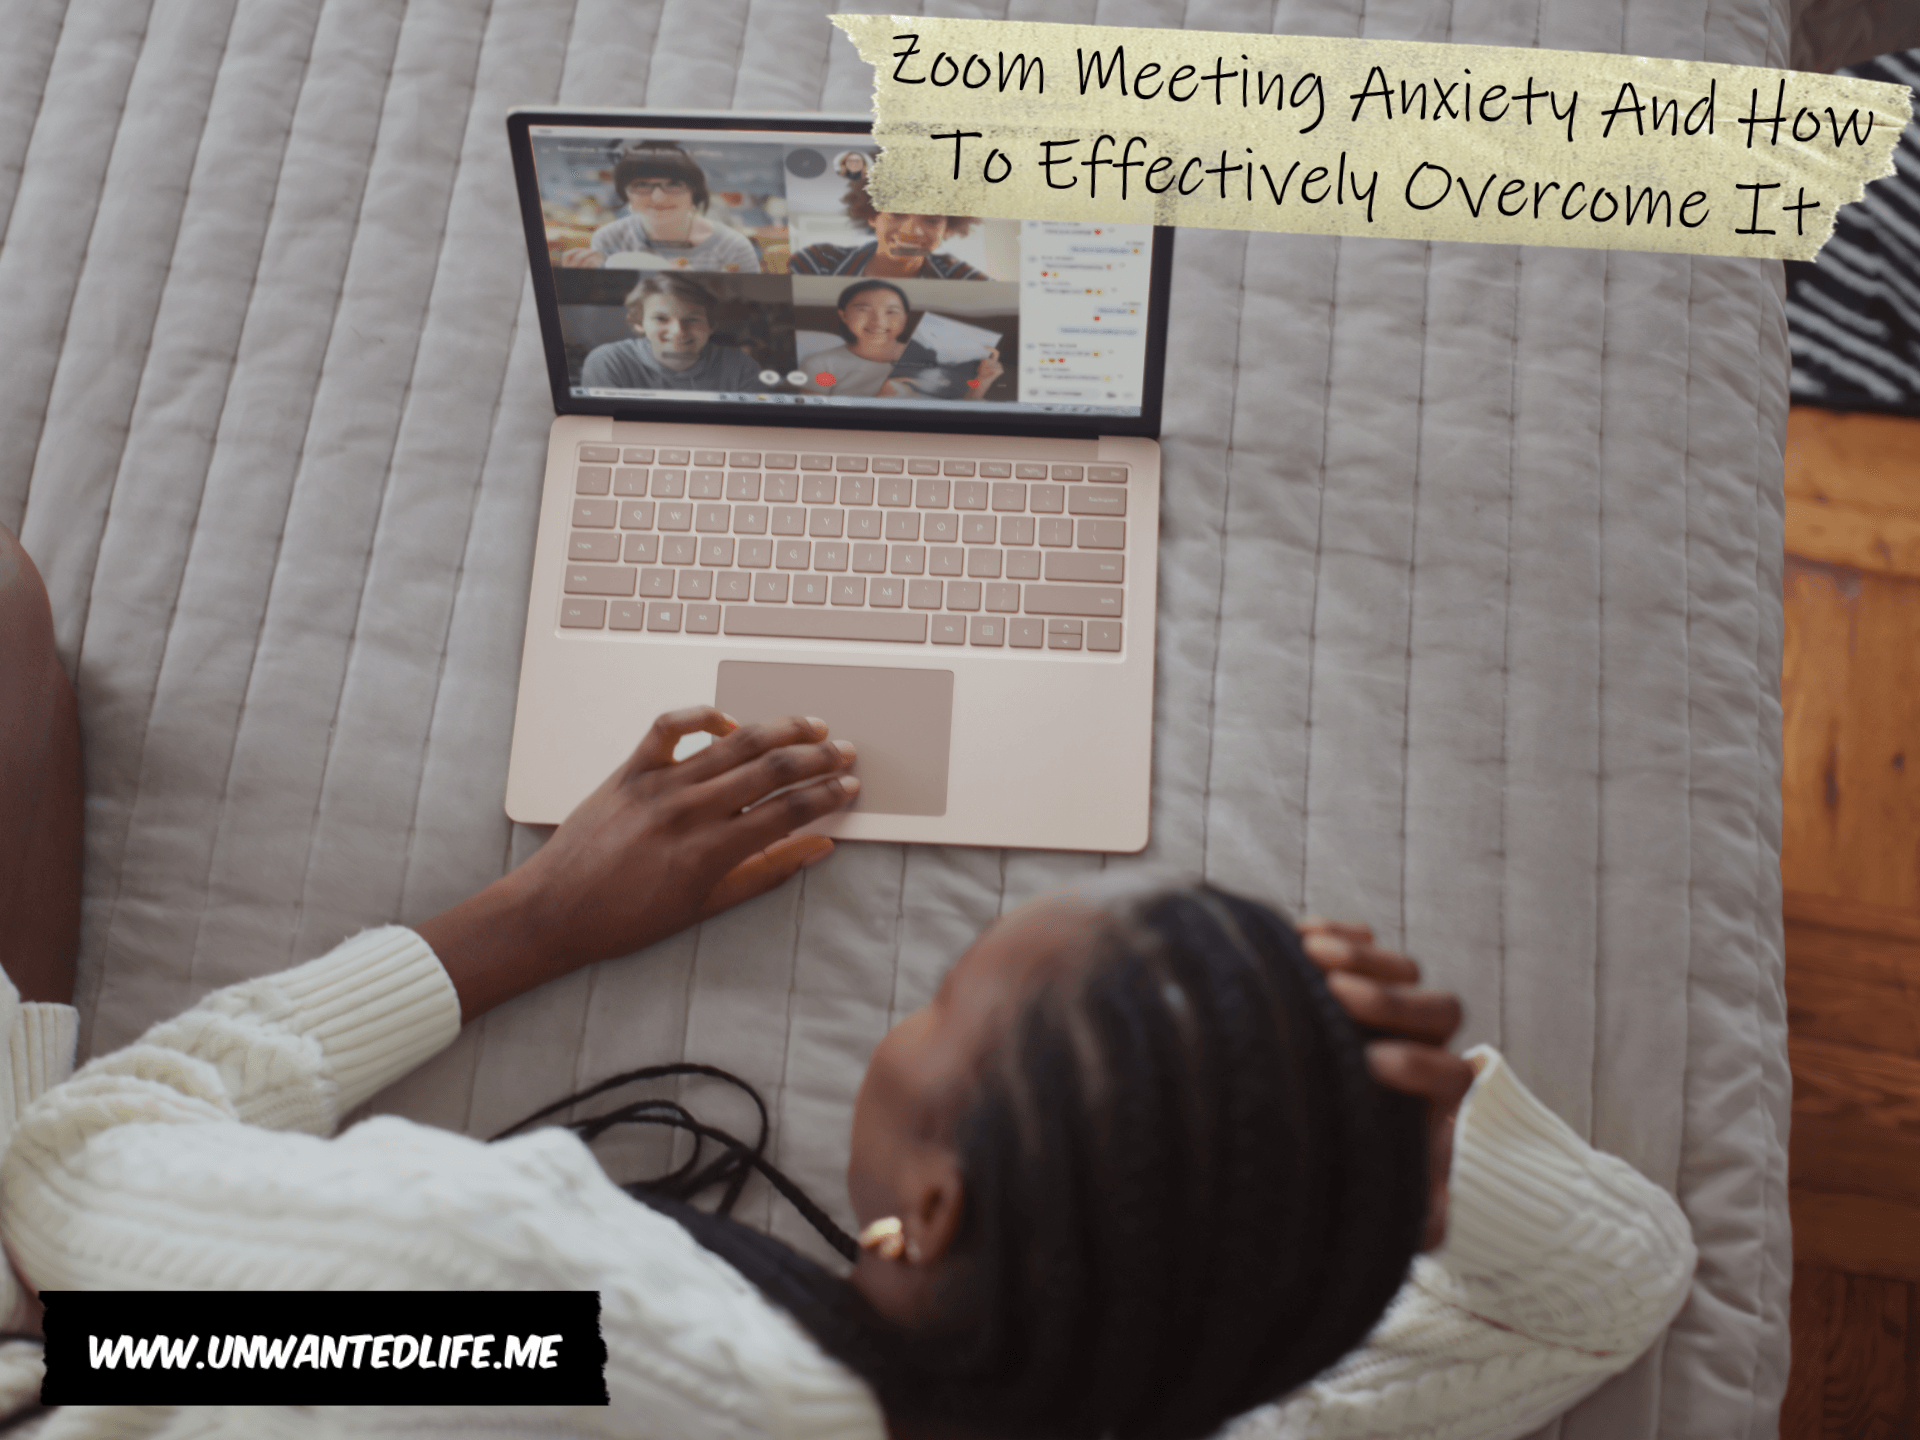 A photo of a young black woman laying across her bed with her laptop open to a group video chat session to represent the topic of the article - Zoom Meeting Anxiety And How To Effectively Overcome It